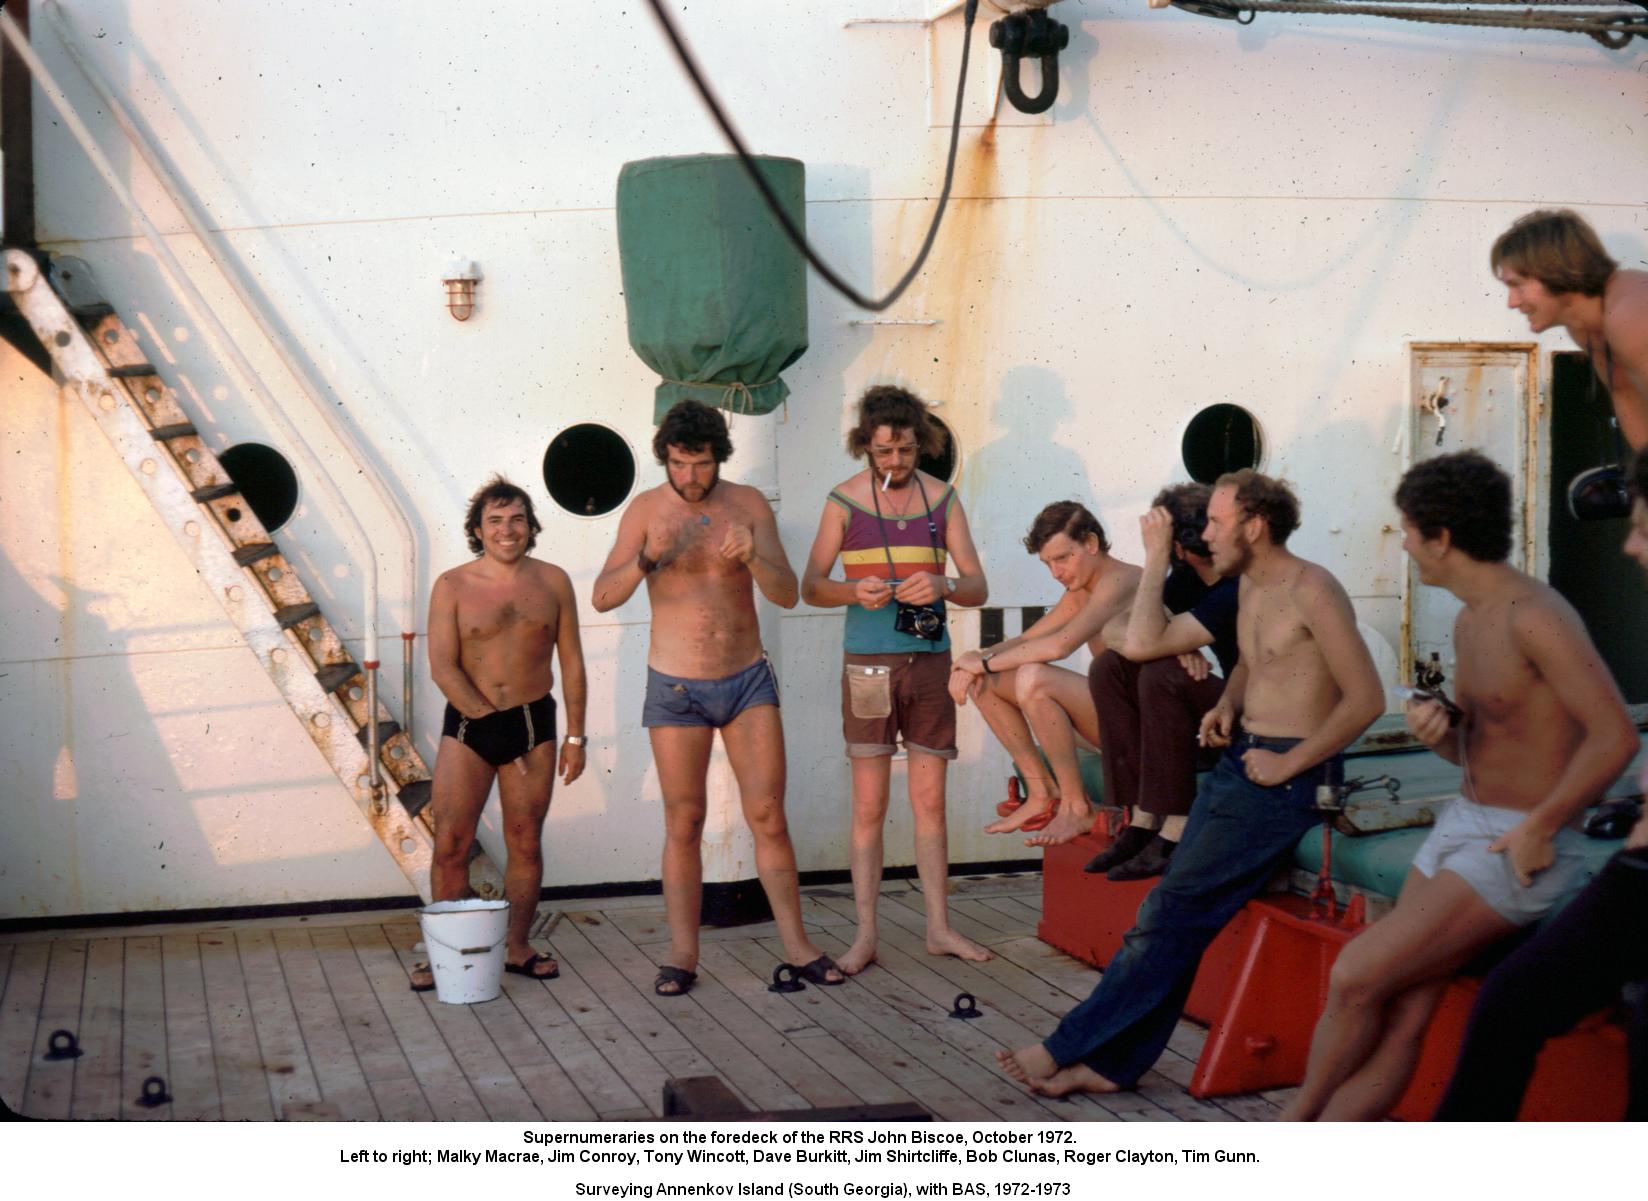 Supernumeraries on the foredeck of the RRS John Biscoe, October 1972.